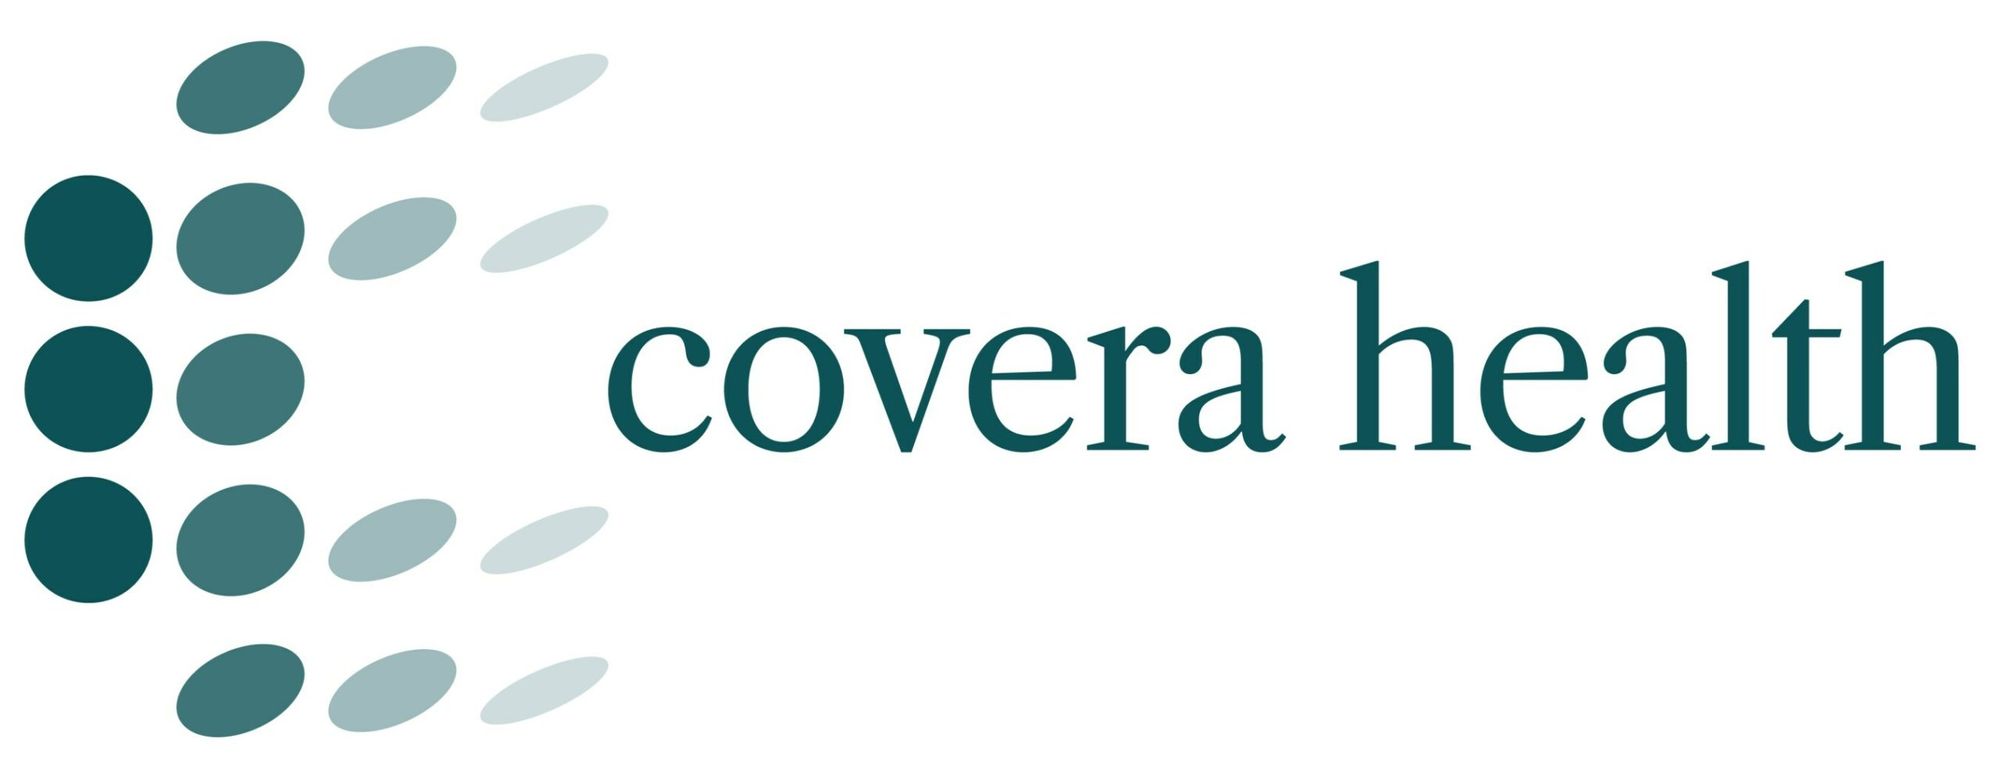 Covera Health Secures $50M in Extended Series C Investment Round